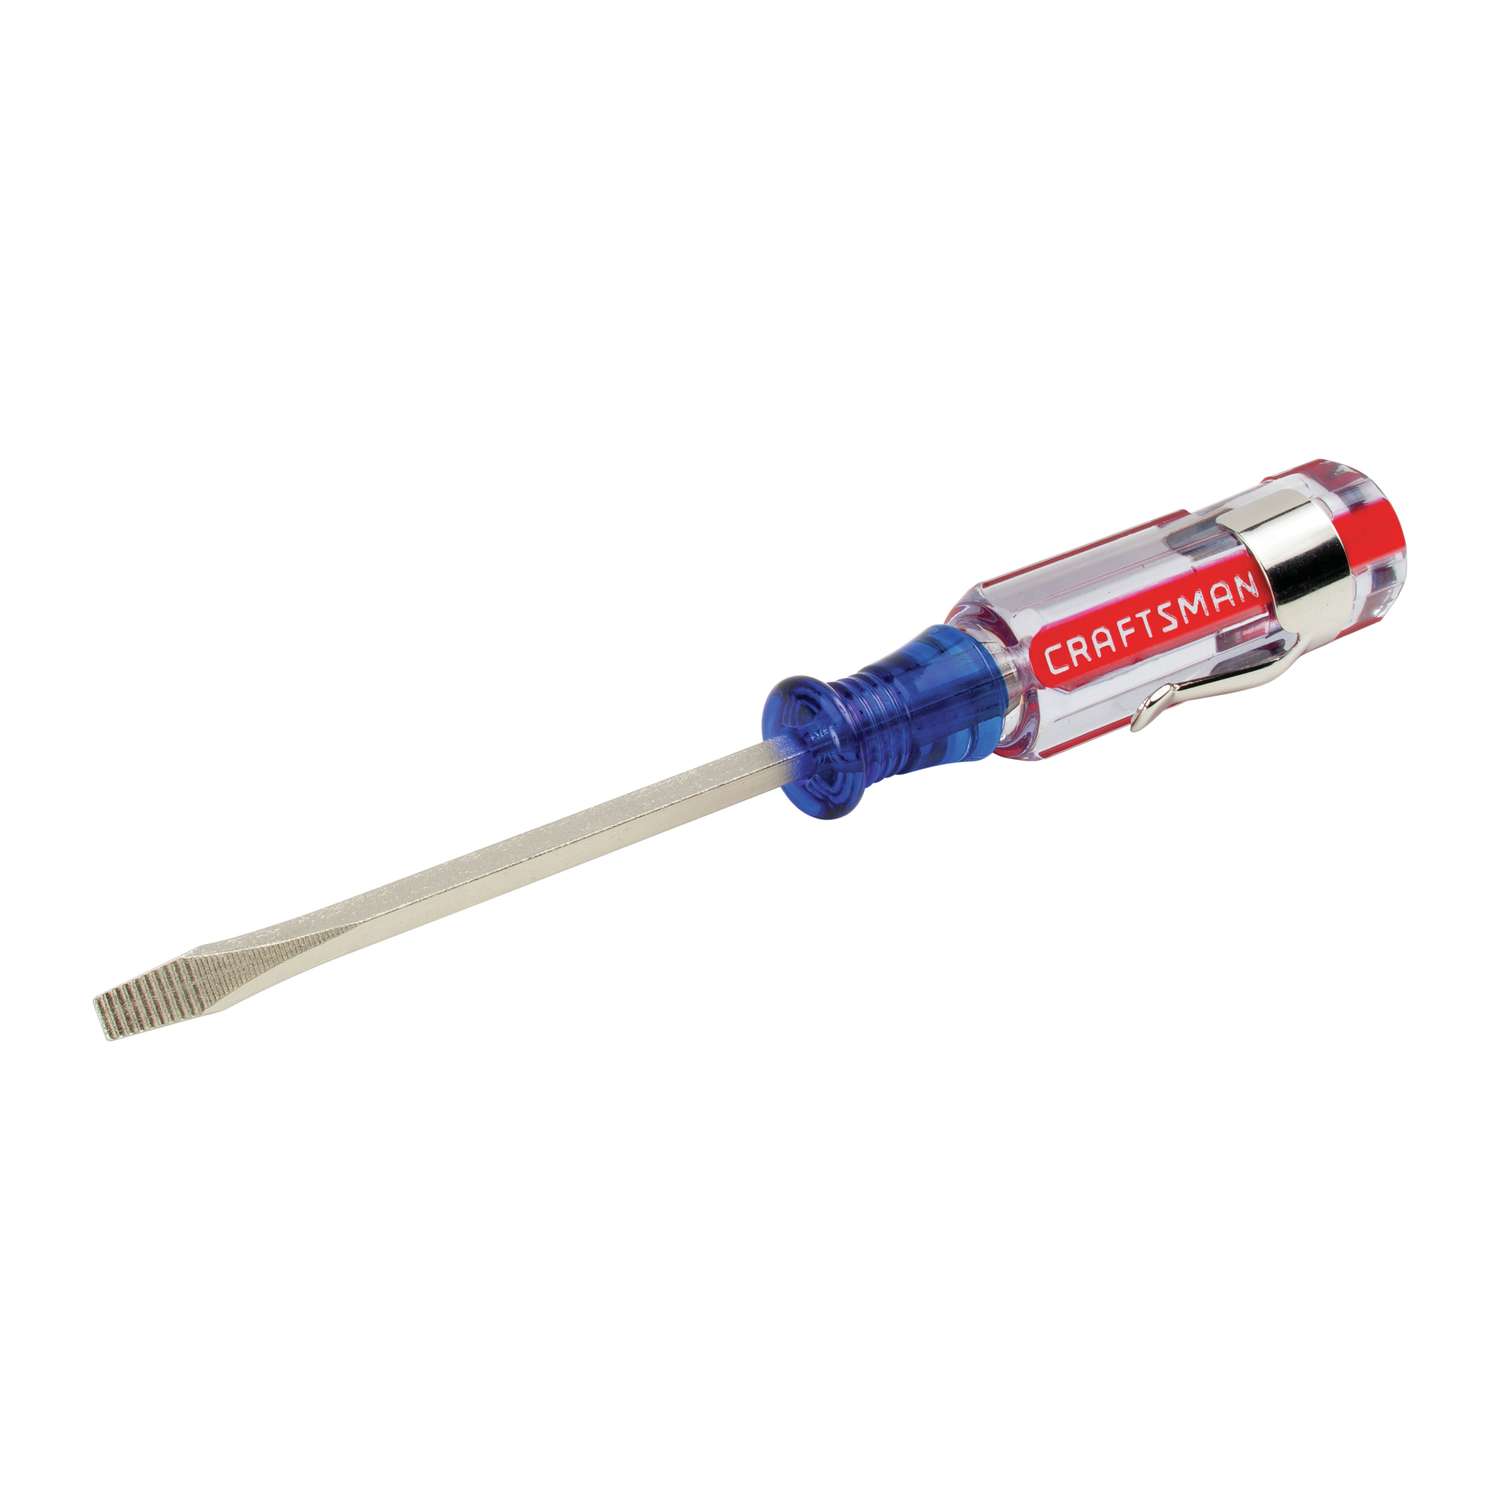 Made in USA for sale online Craftsman 41583 Slotted 1/4” X 4” Screwdriver 